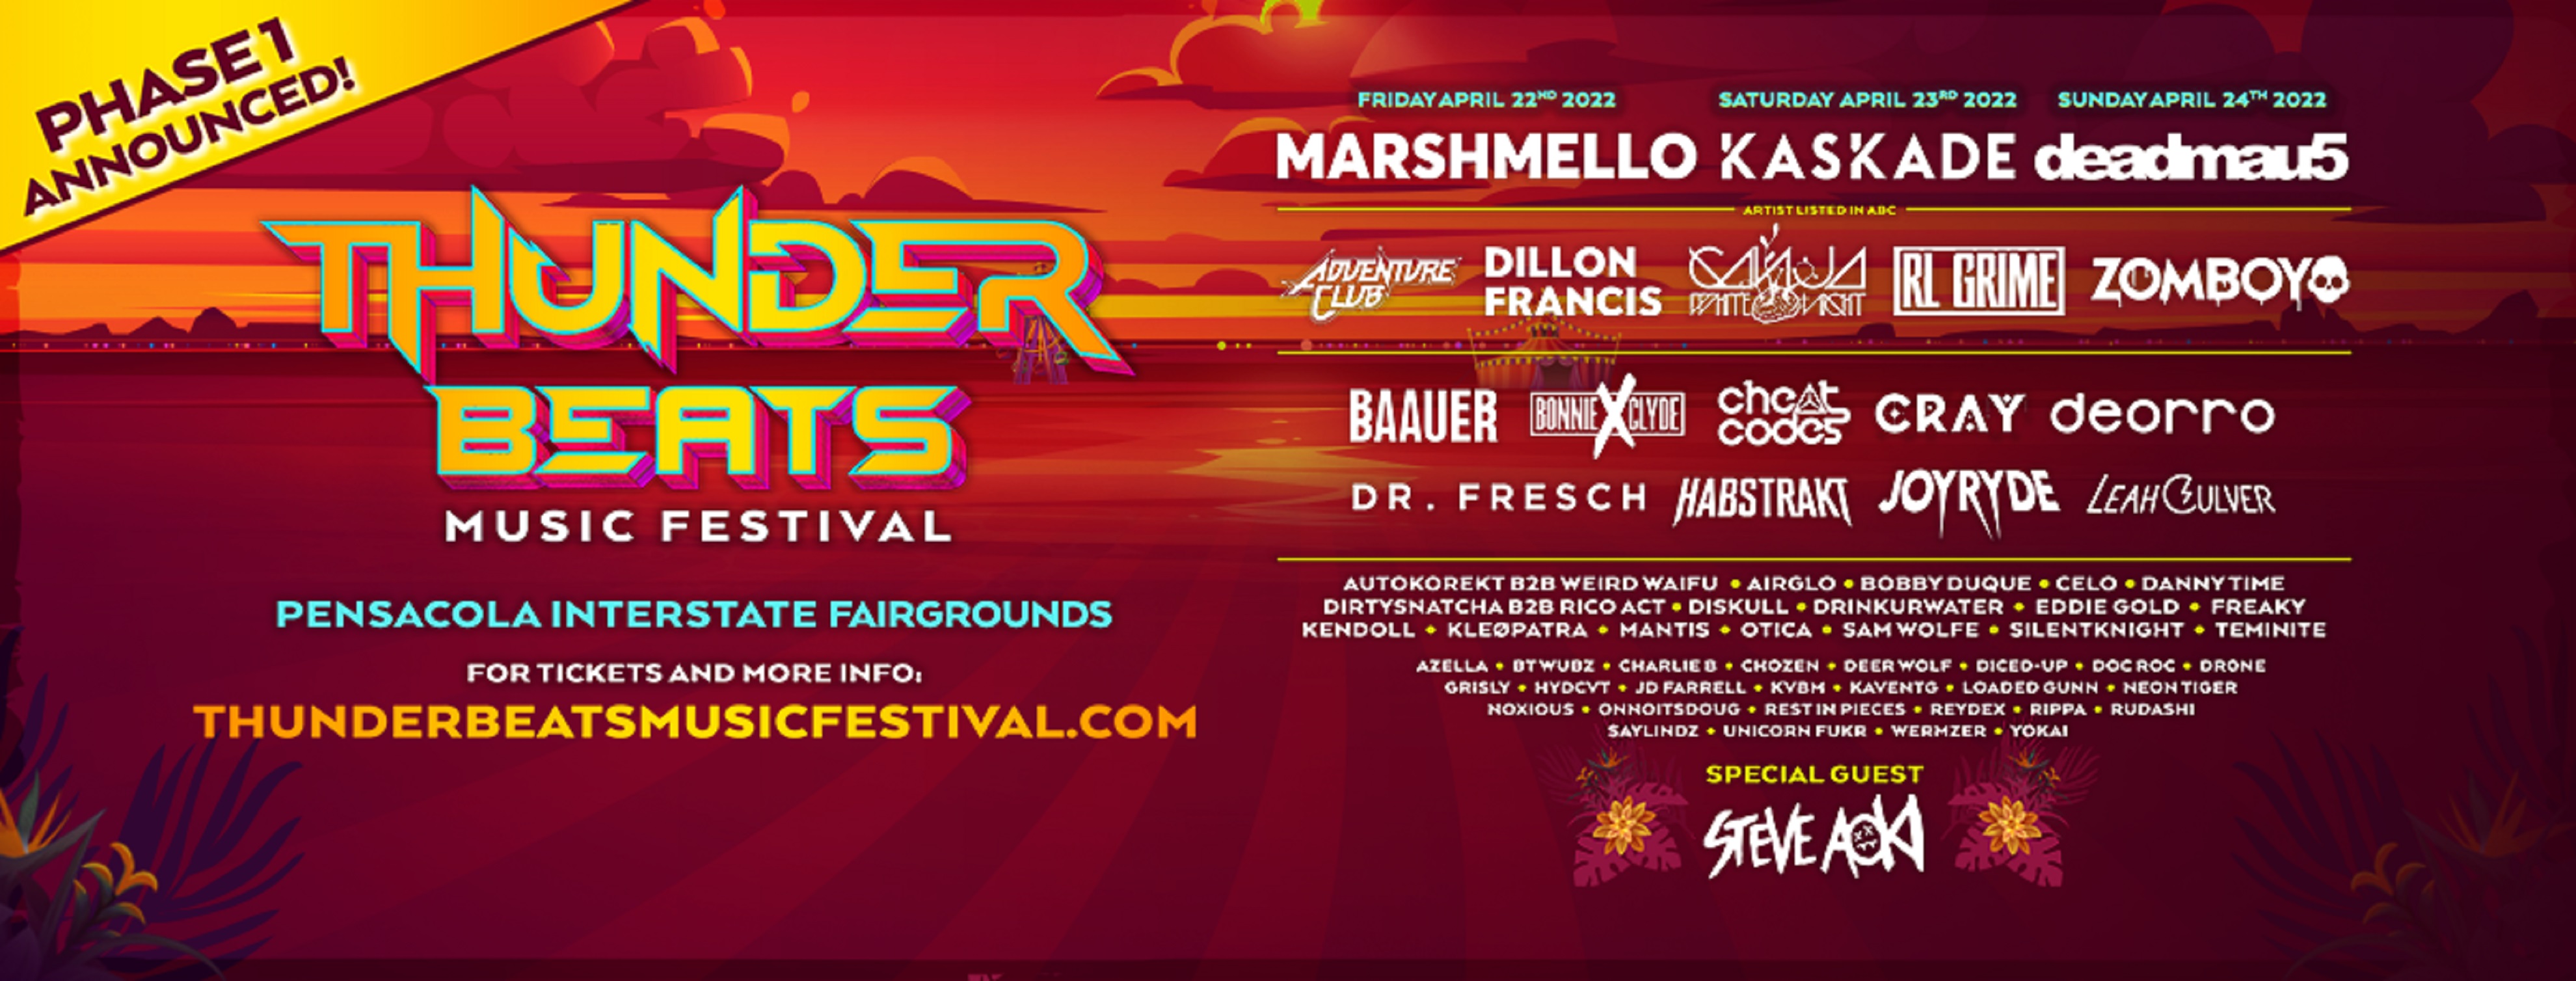 THUNDER BEATS MUSIC FESTIVAL ANNOUNCES LINEUP FOR INAUGURAL EVENT, APRIL 22-24, 2022